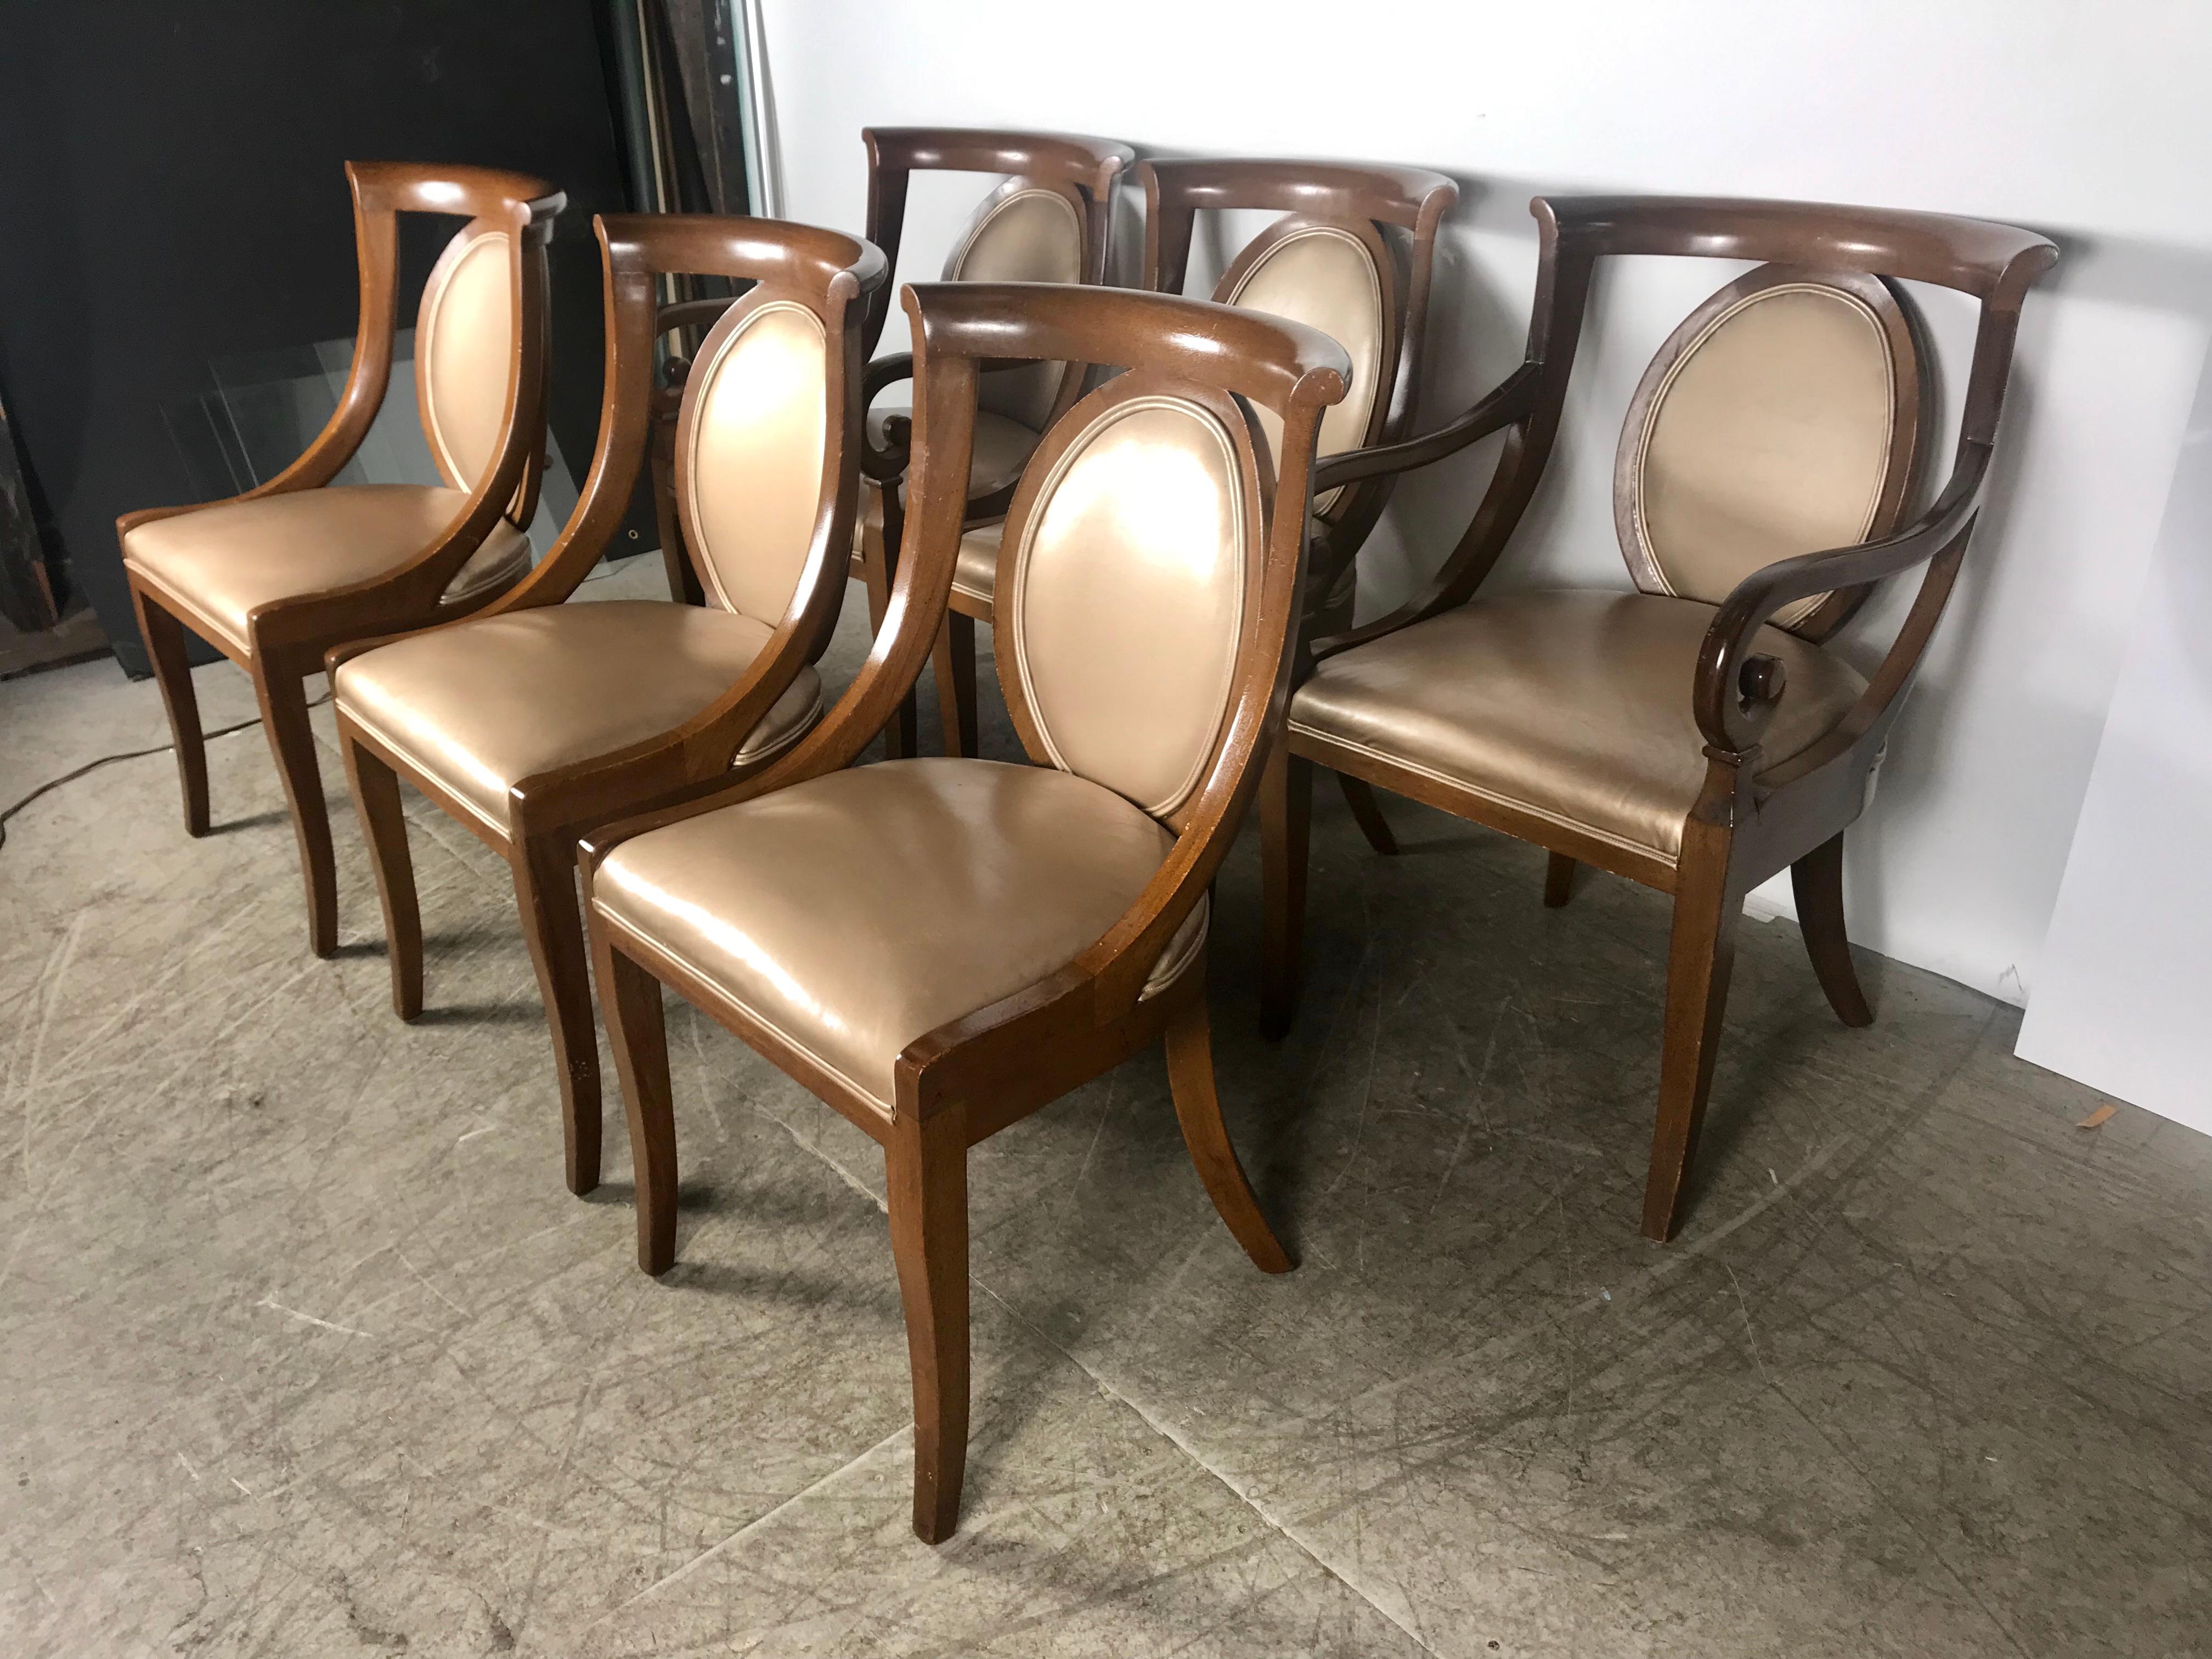 American Classic Set of 6 Regency Dining Chairs by Bethlehem Furniture For Sale